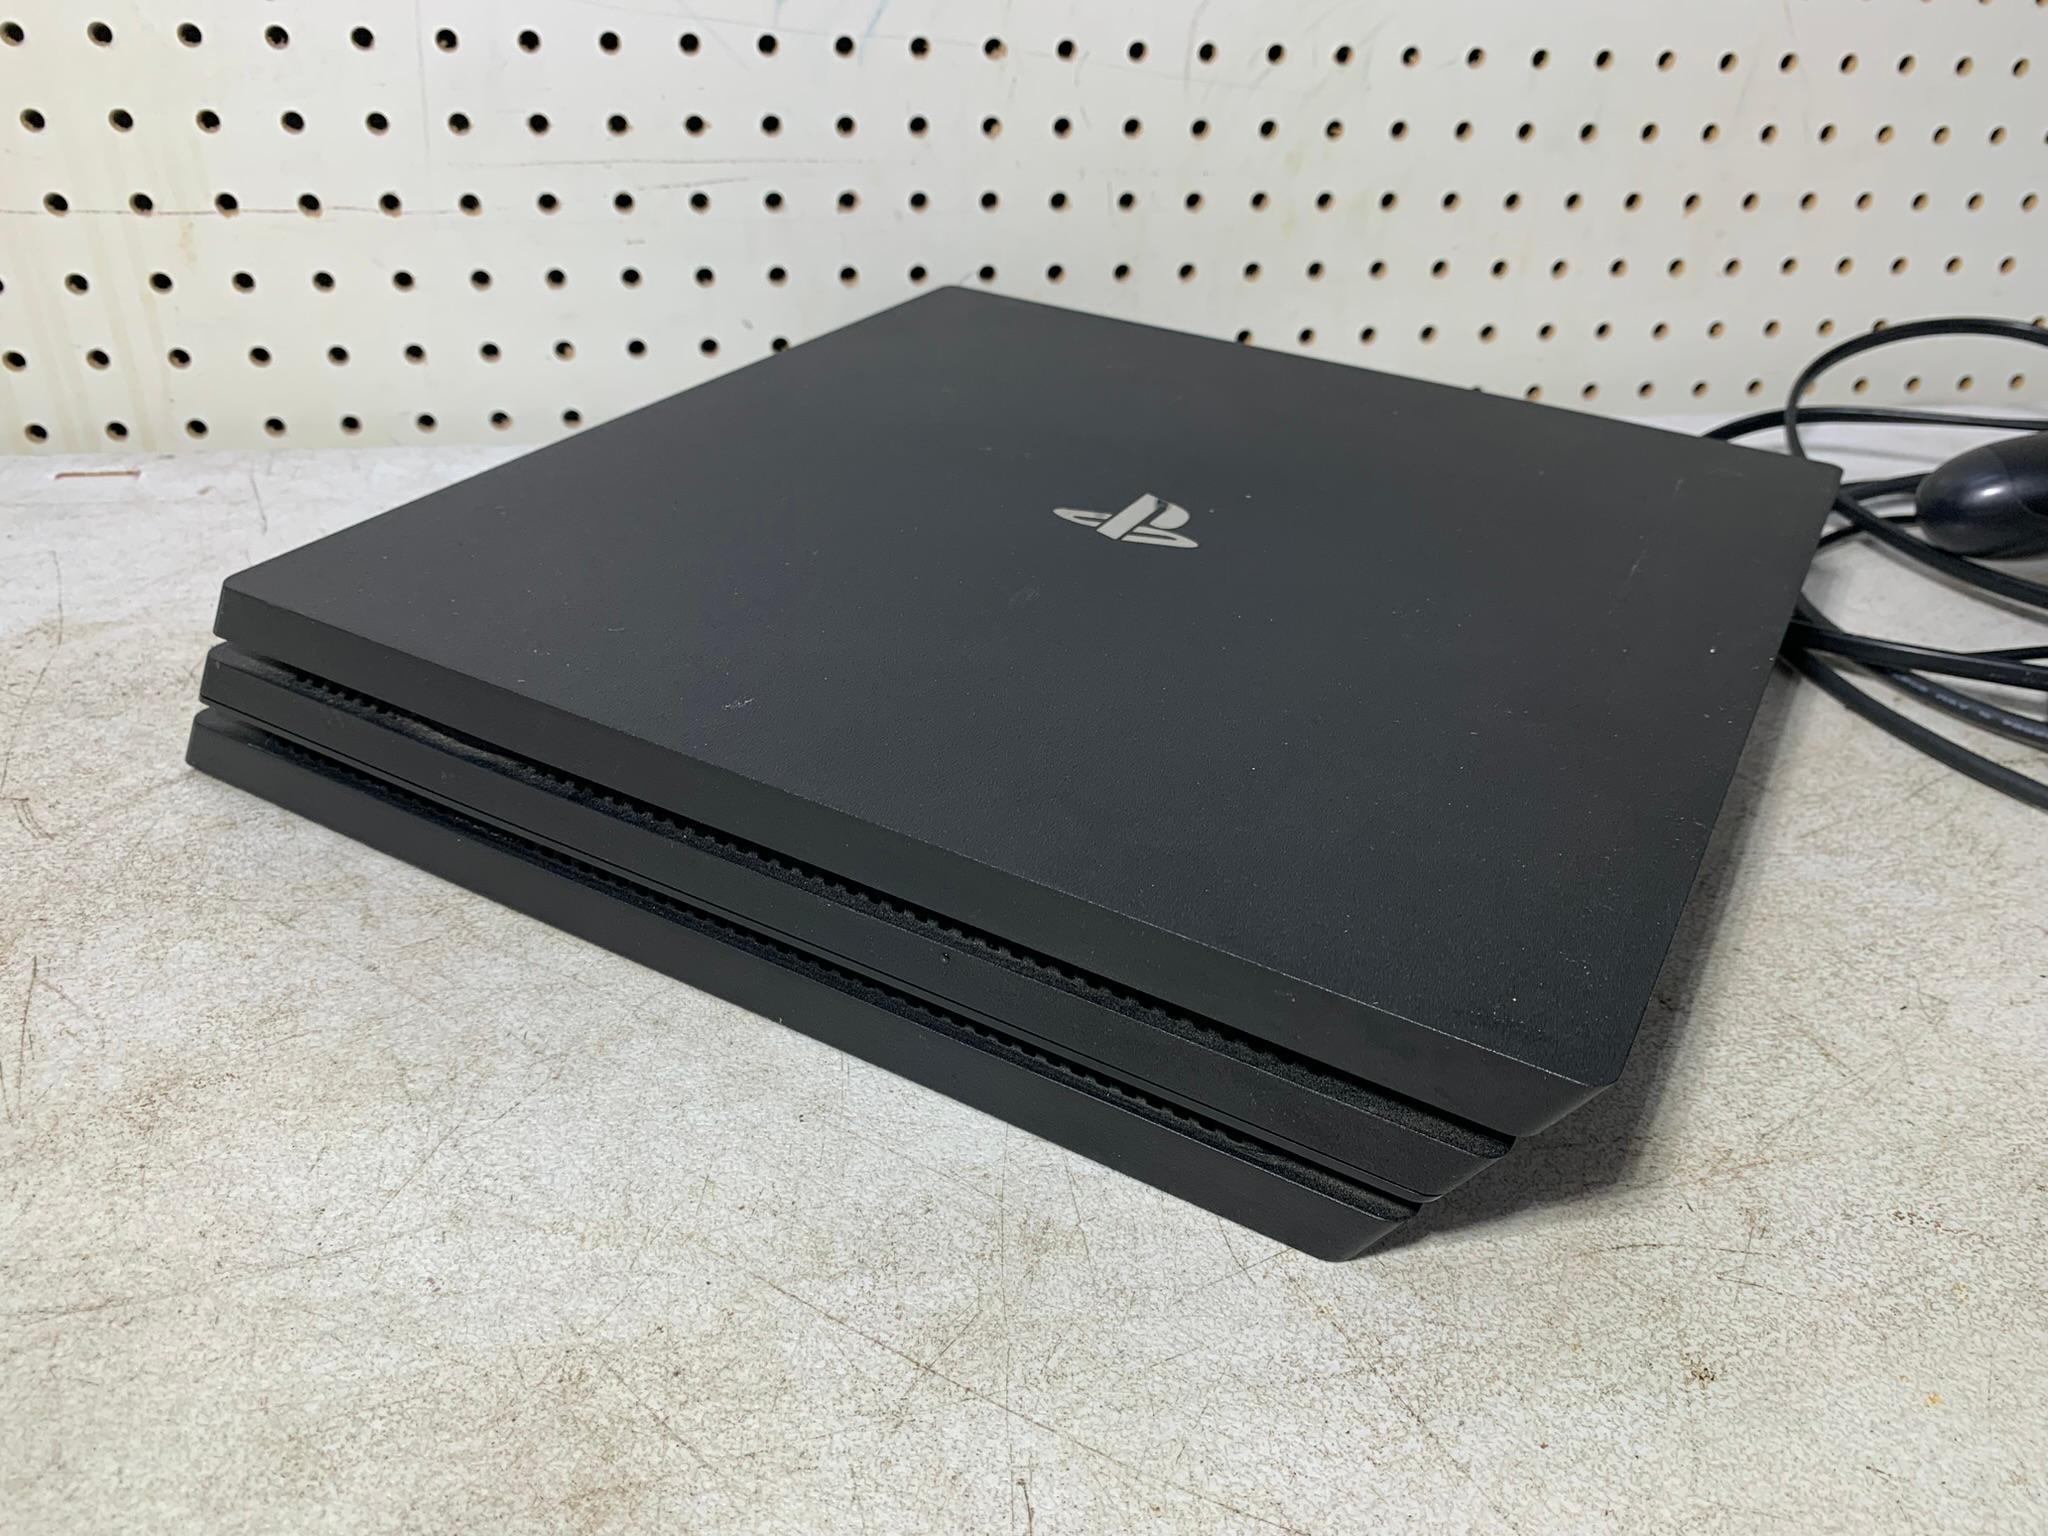 Sony PS4 Console with Controller and Cords